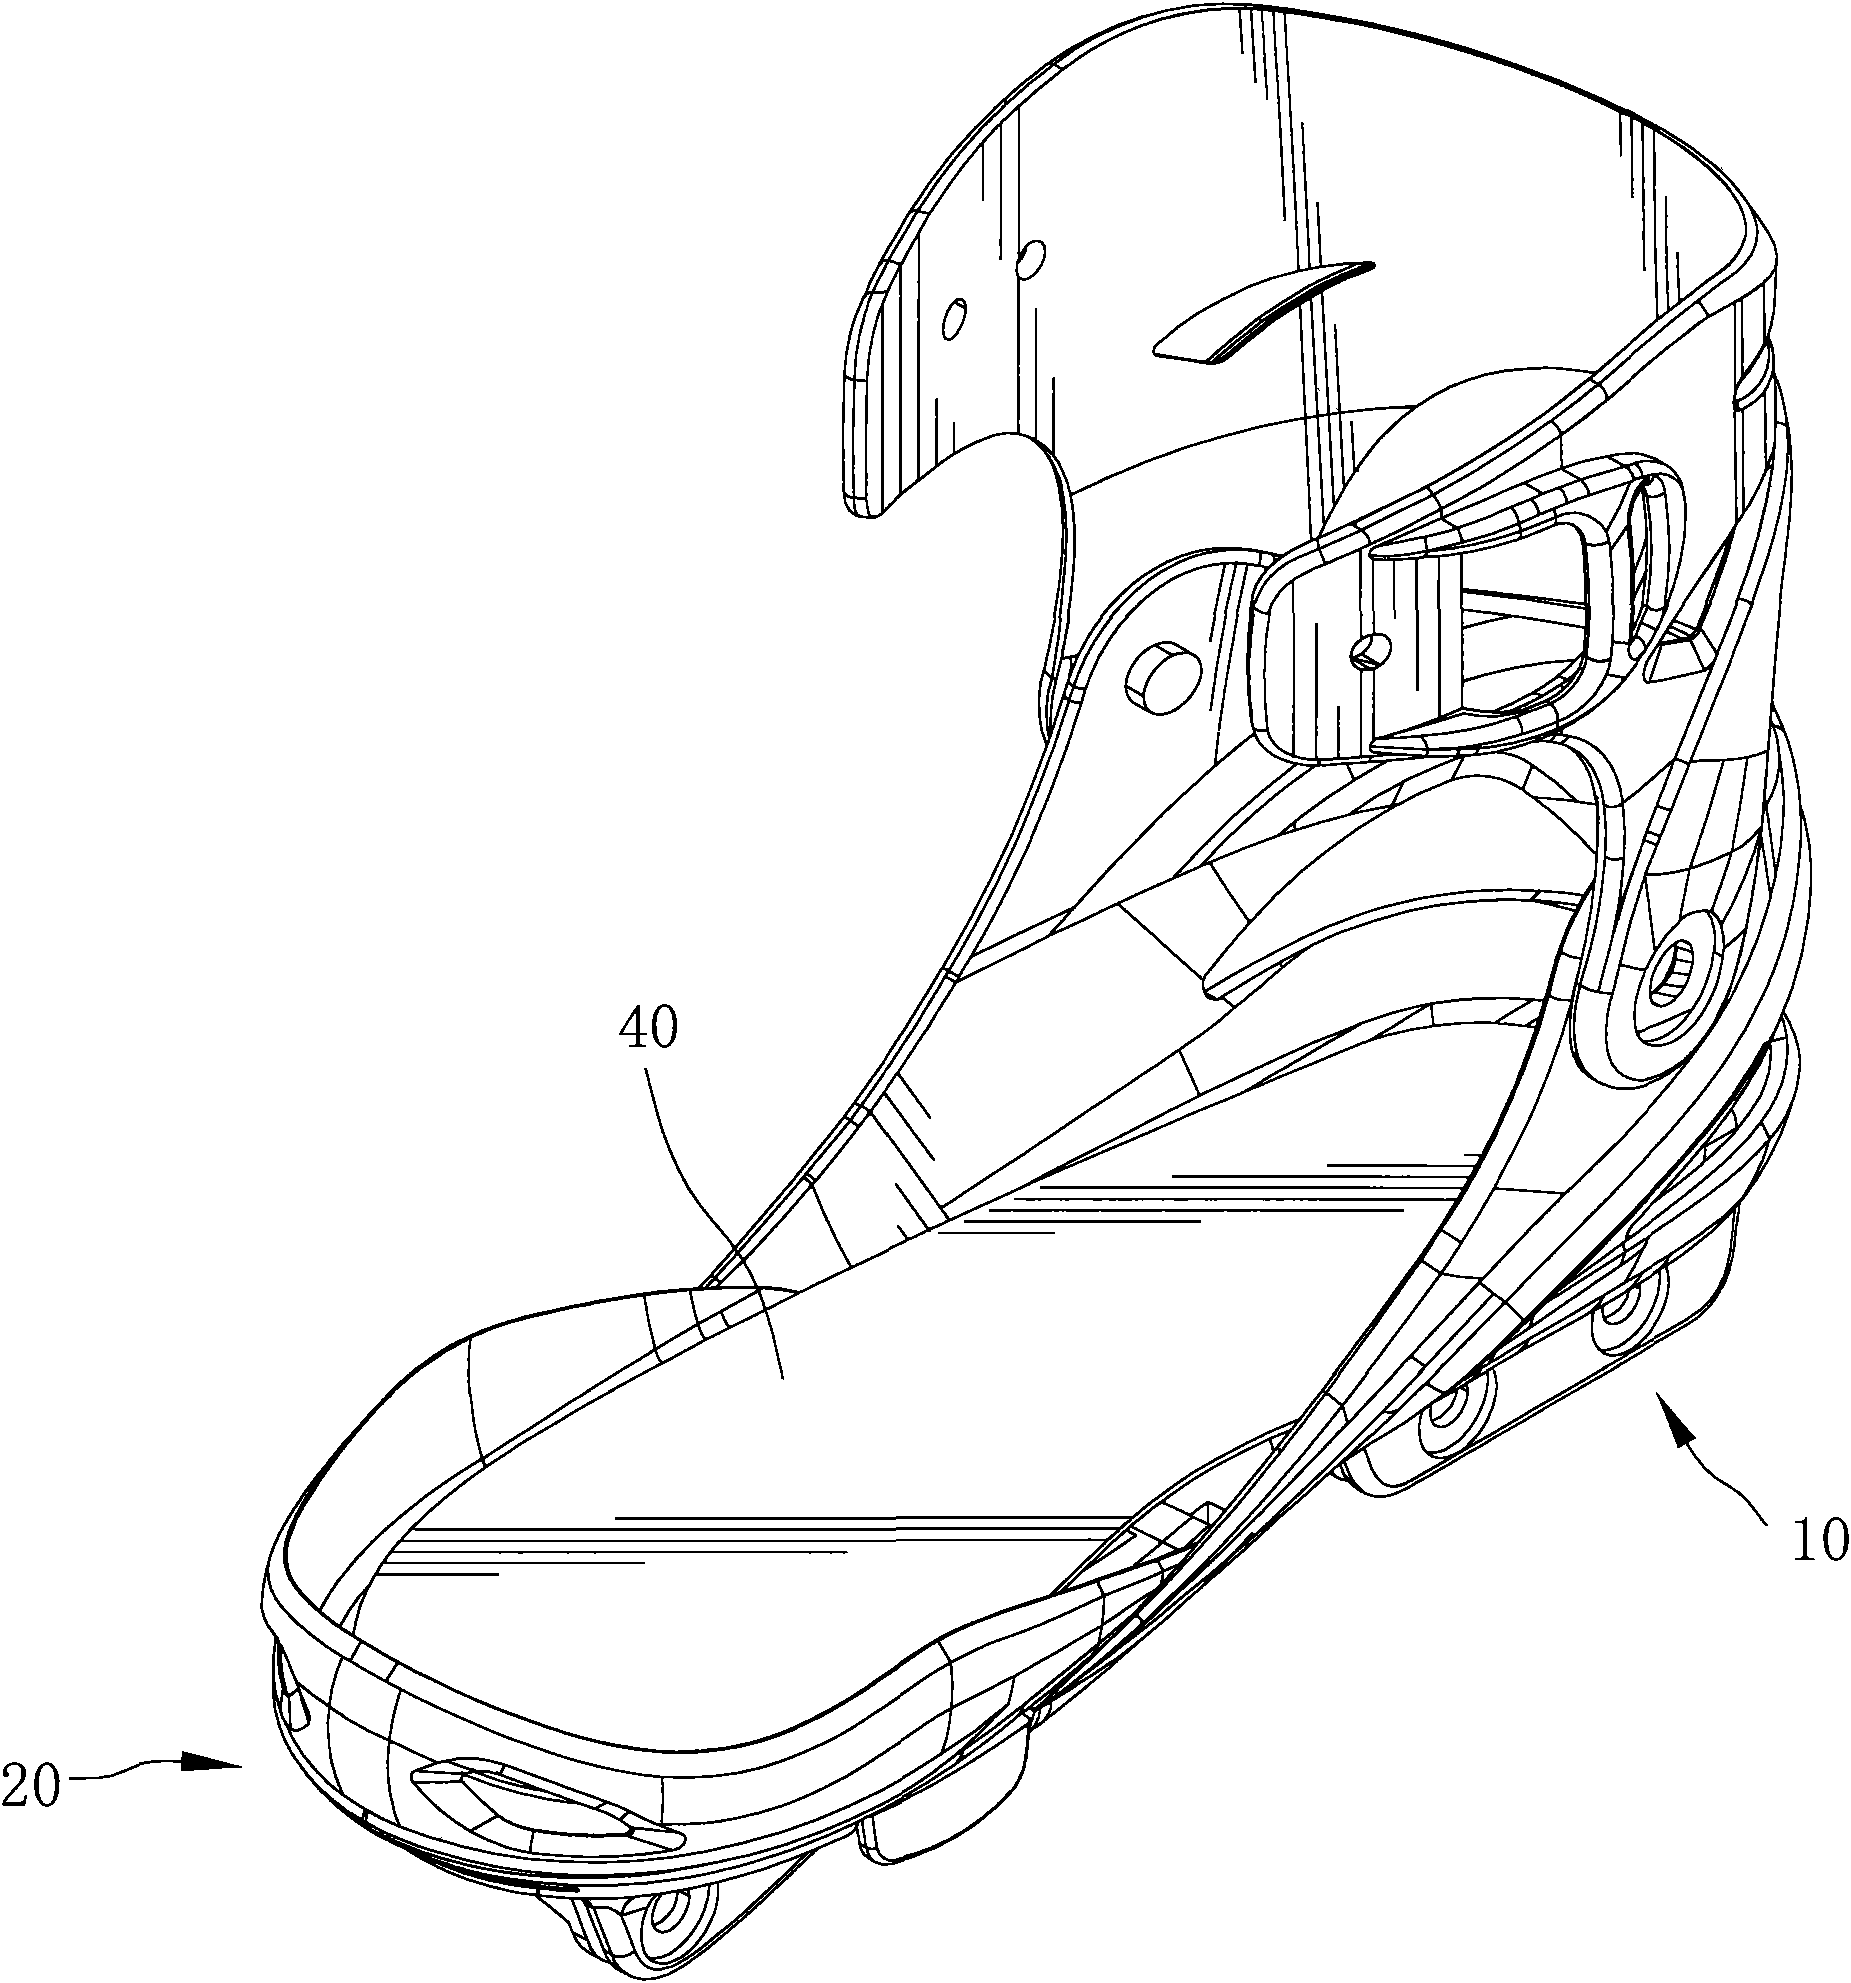 Skating shoes with adjustable size